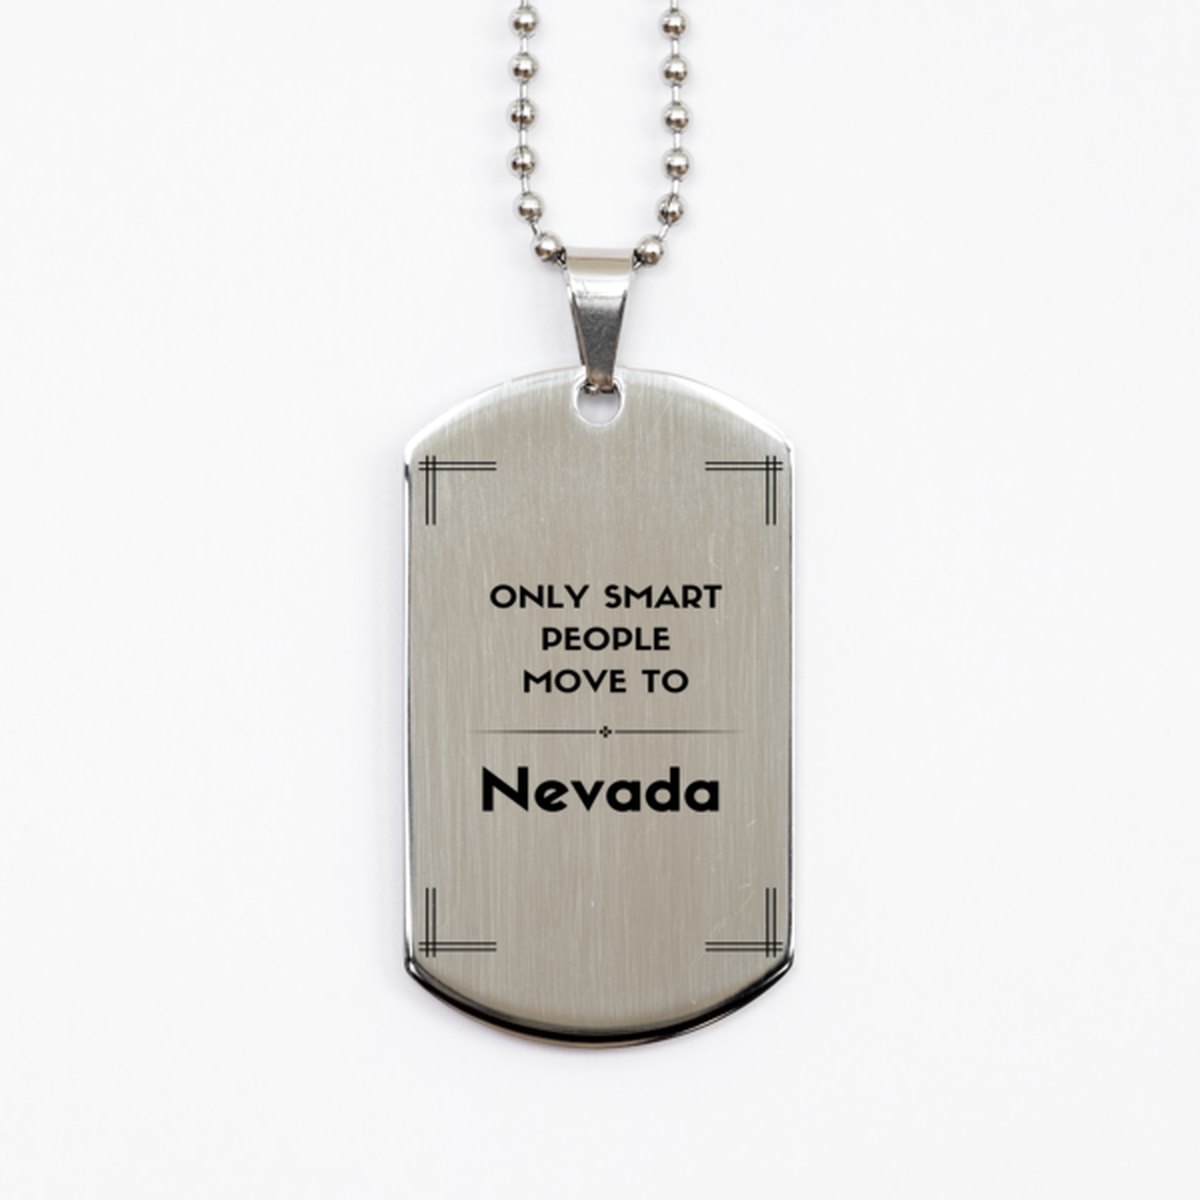 Only smart people move to Nevada Silver Dog Tag, Gag Gifts For Nevada, Move to Nevada Gifts for Friends Coworker Funny Saying Quote